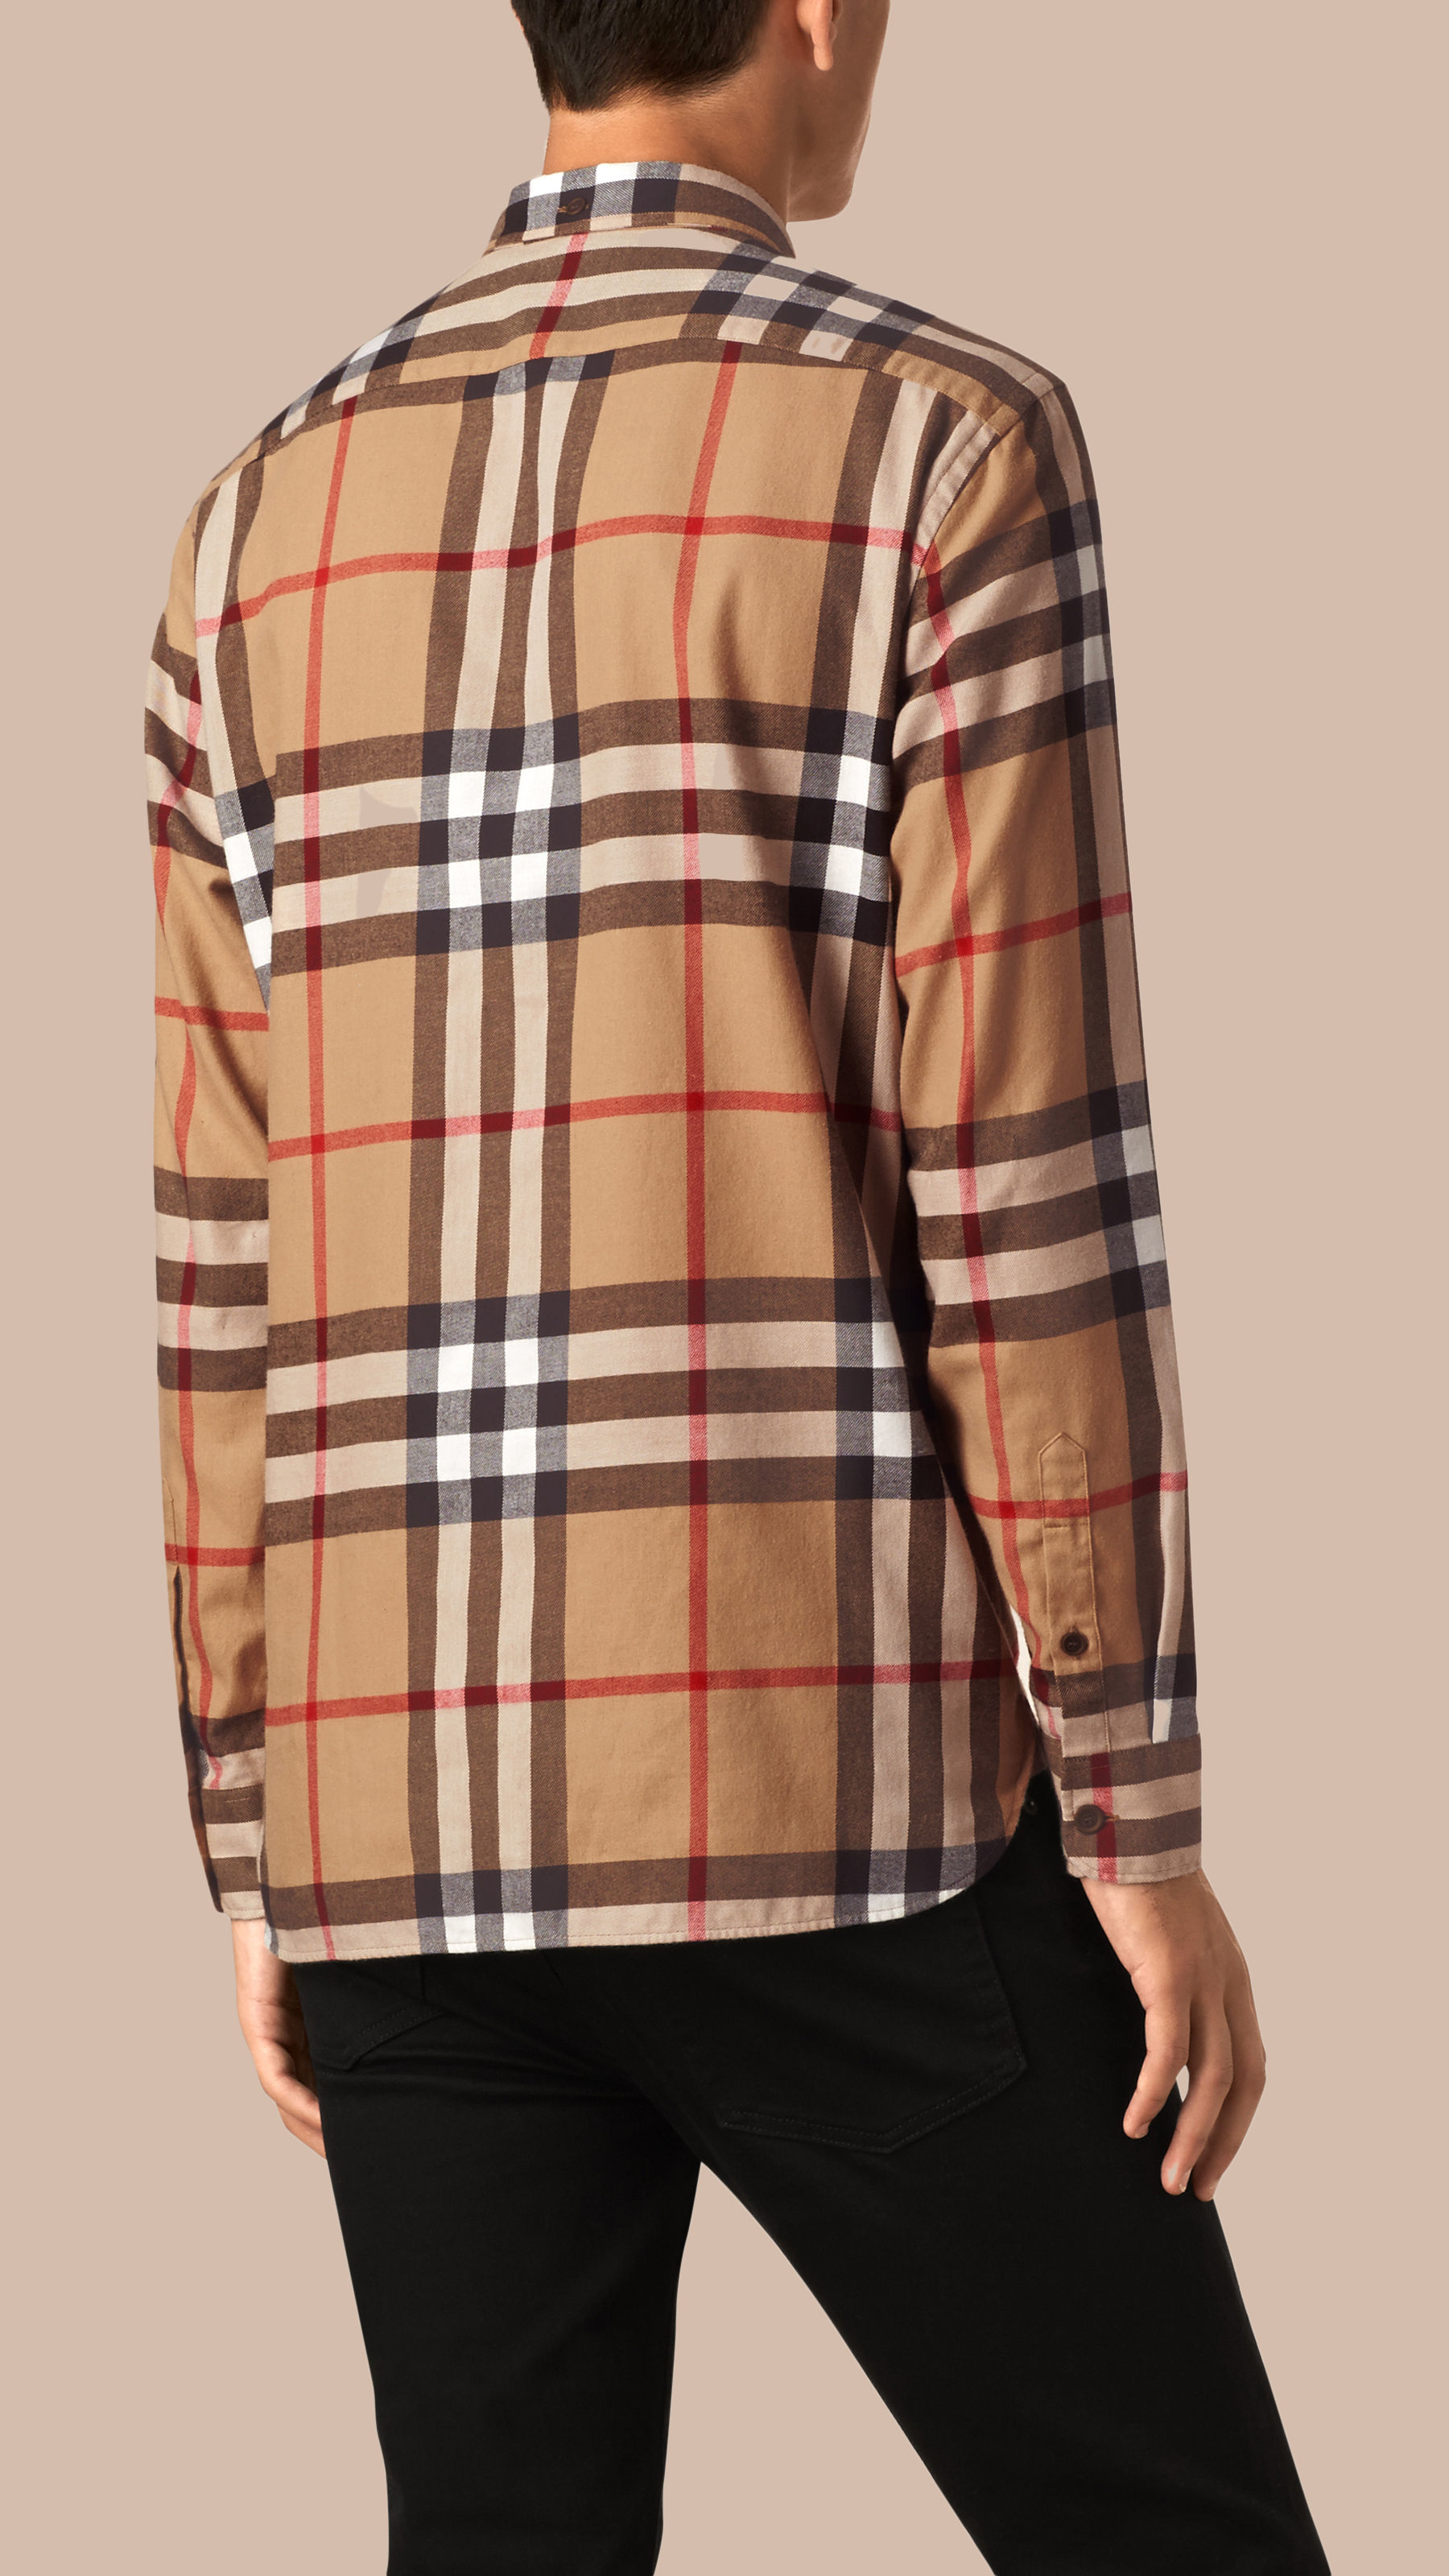 Burberry Check Cotton Flannel Shirt in Camel (Orange) for Men - Lyst